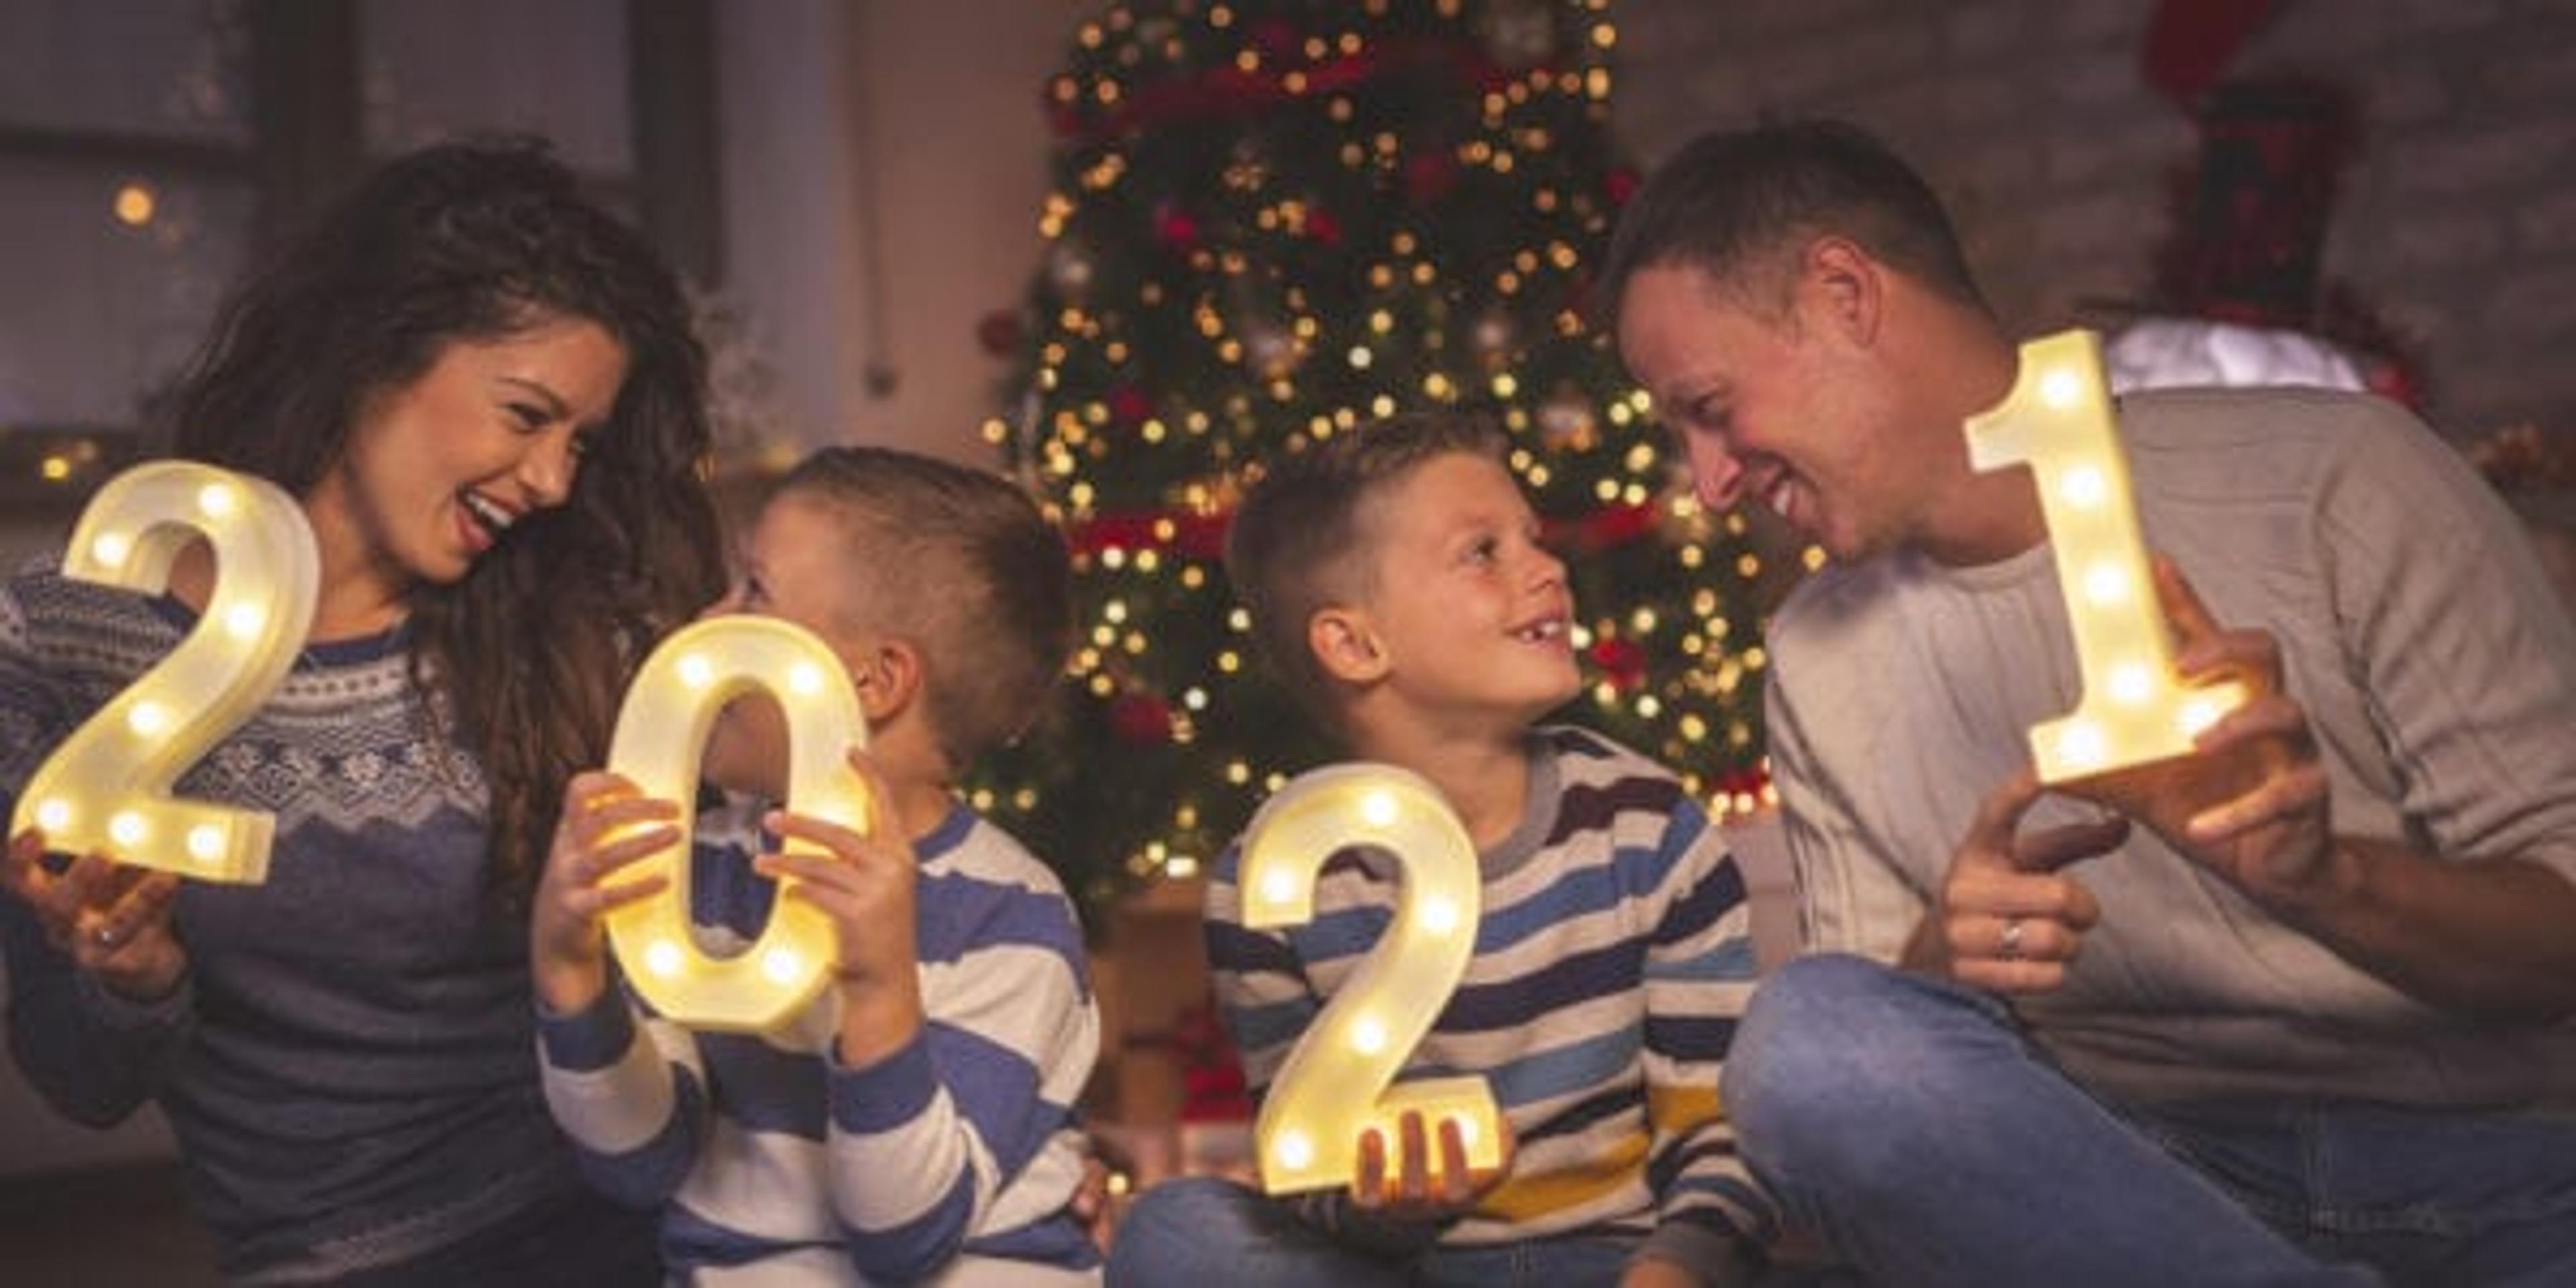 Parents celebrating New Years Eve at home with kids, sitting by the Christmas tree, holding illuminative numbers 2021.